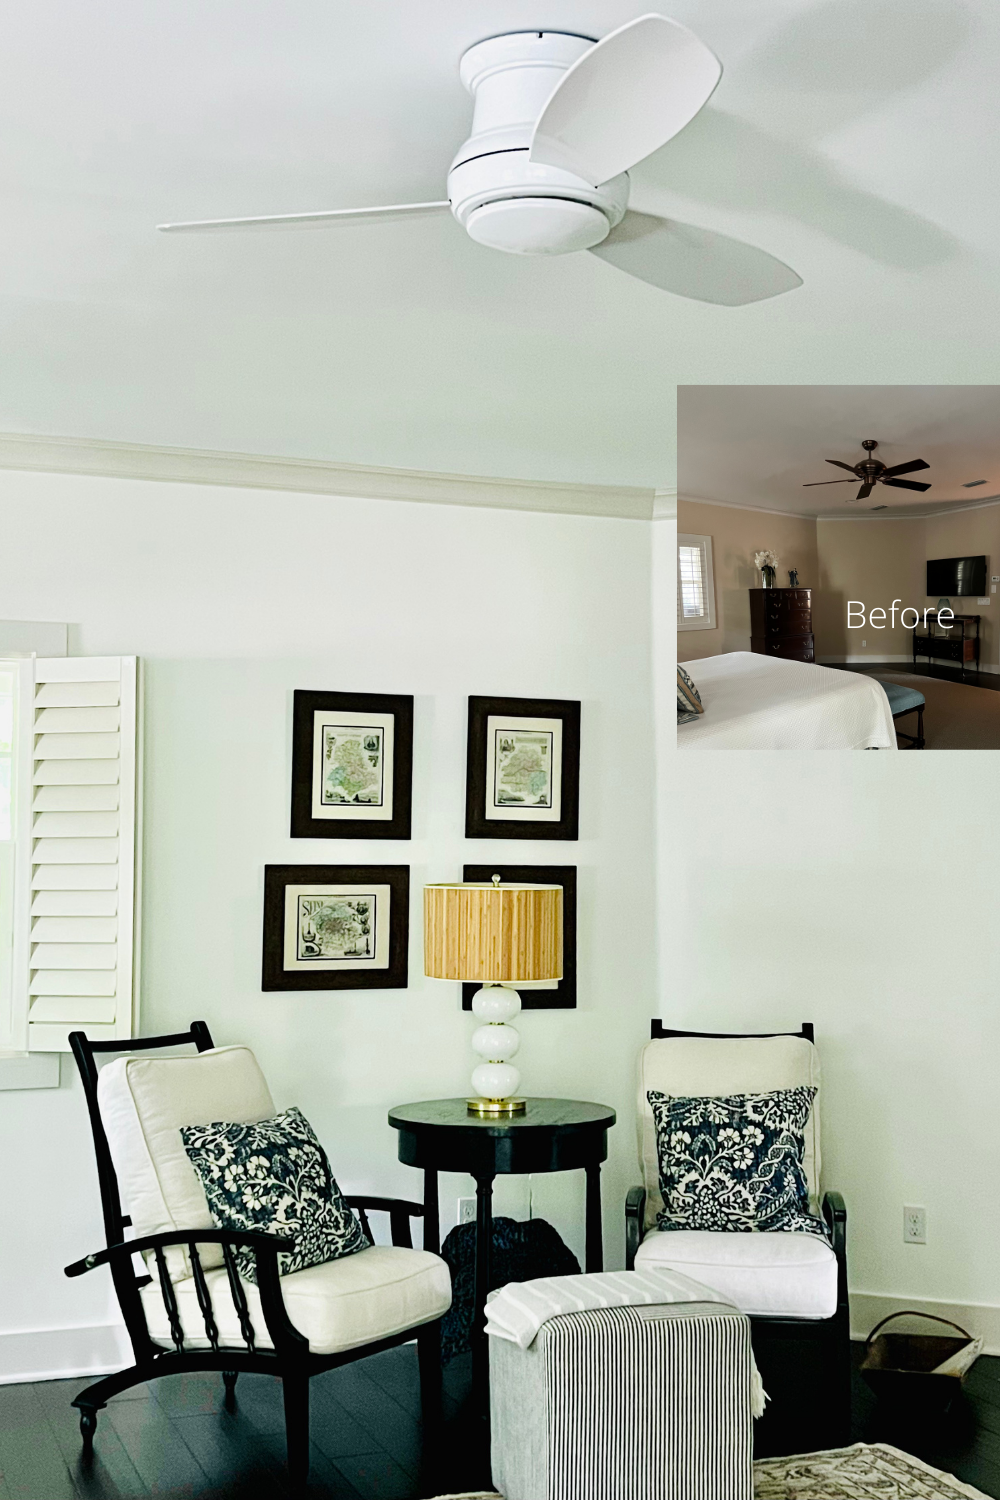 Before and After with ceiling fan